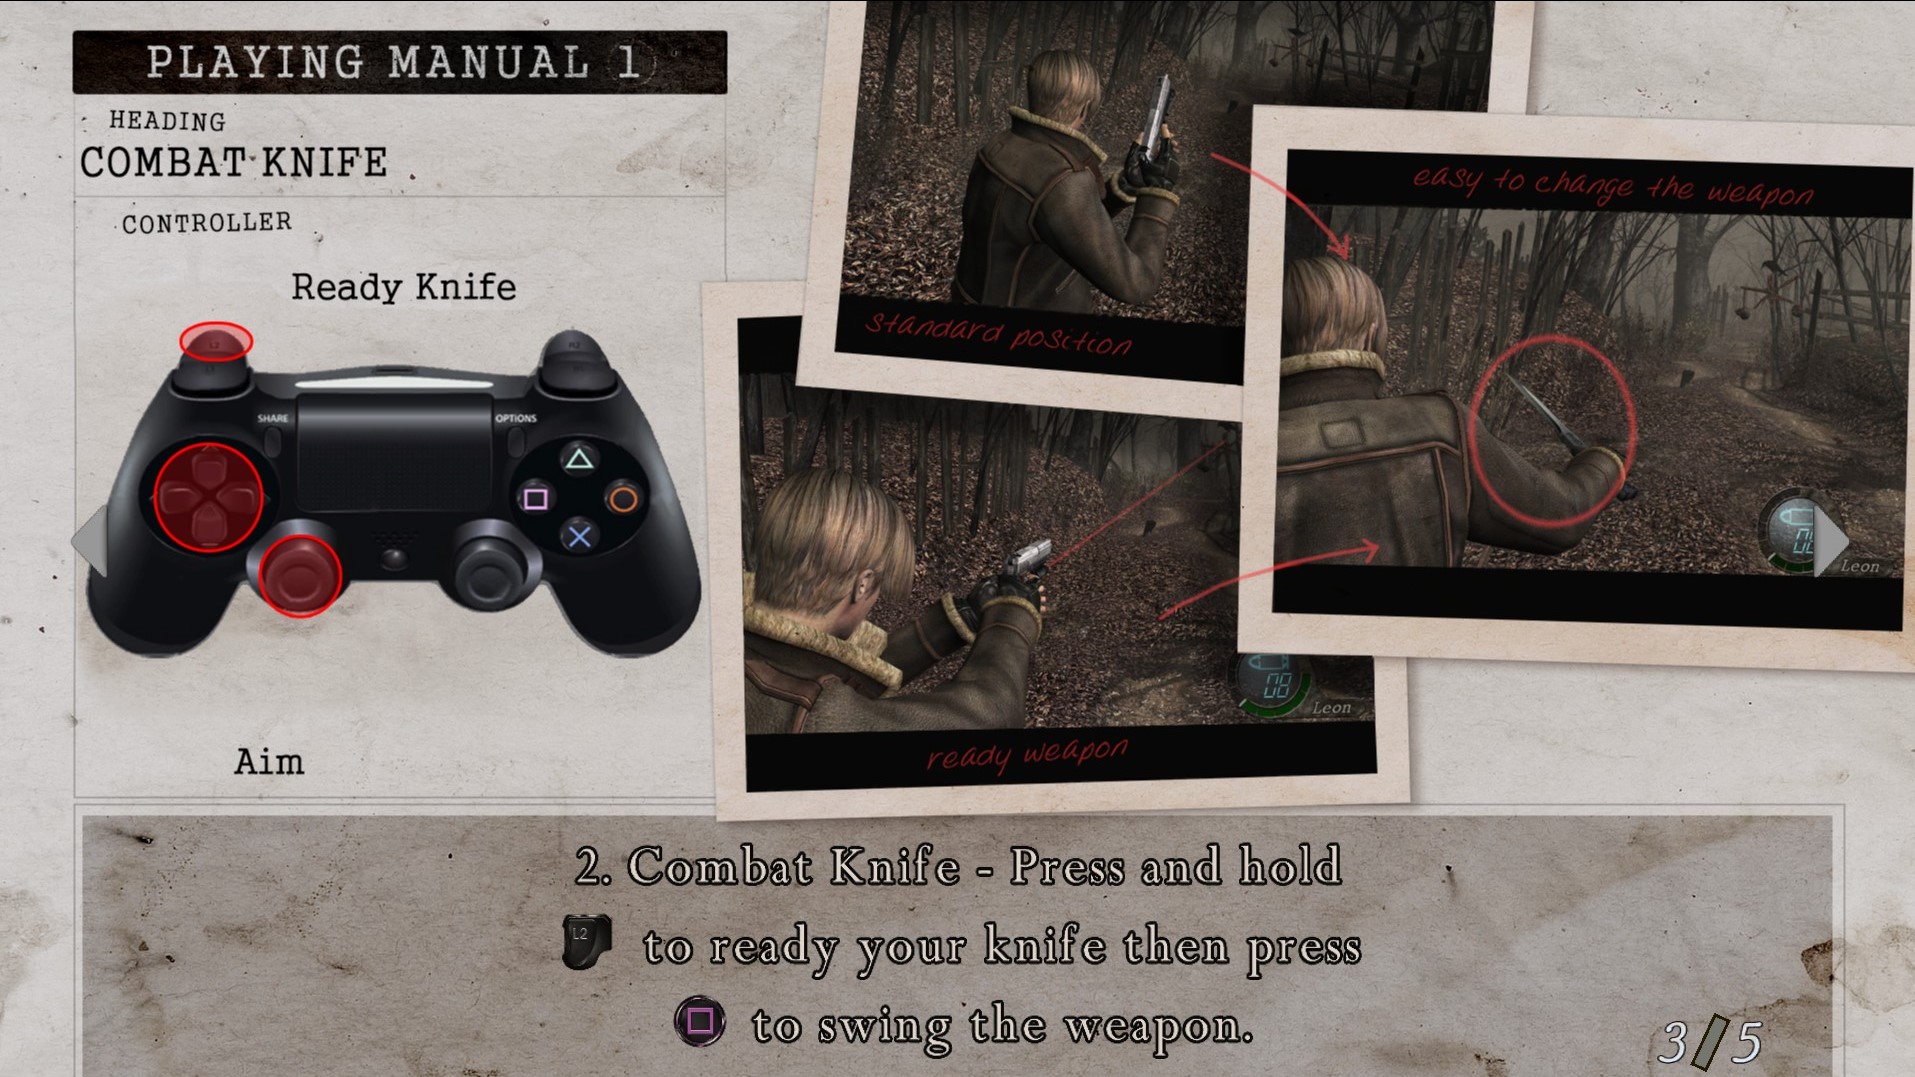 Resident Evil 4 UHD Ultimate Trainer at Resident Evil 4 Nexus - Mods and  community